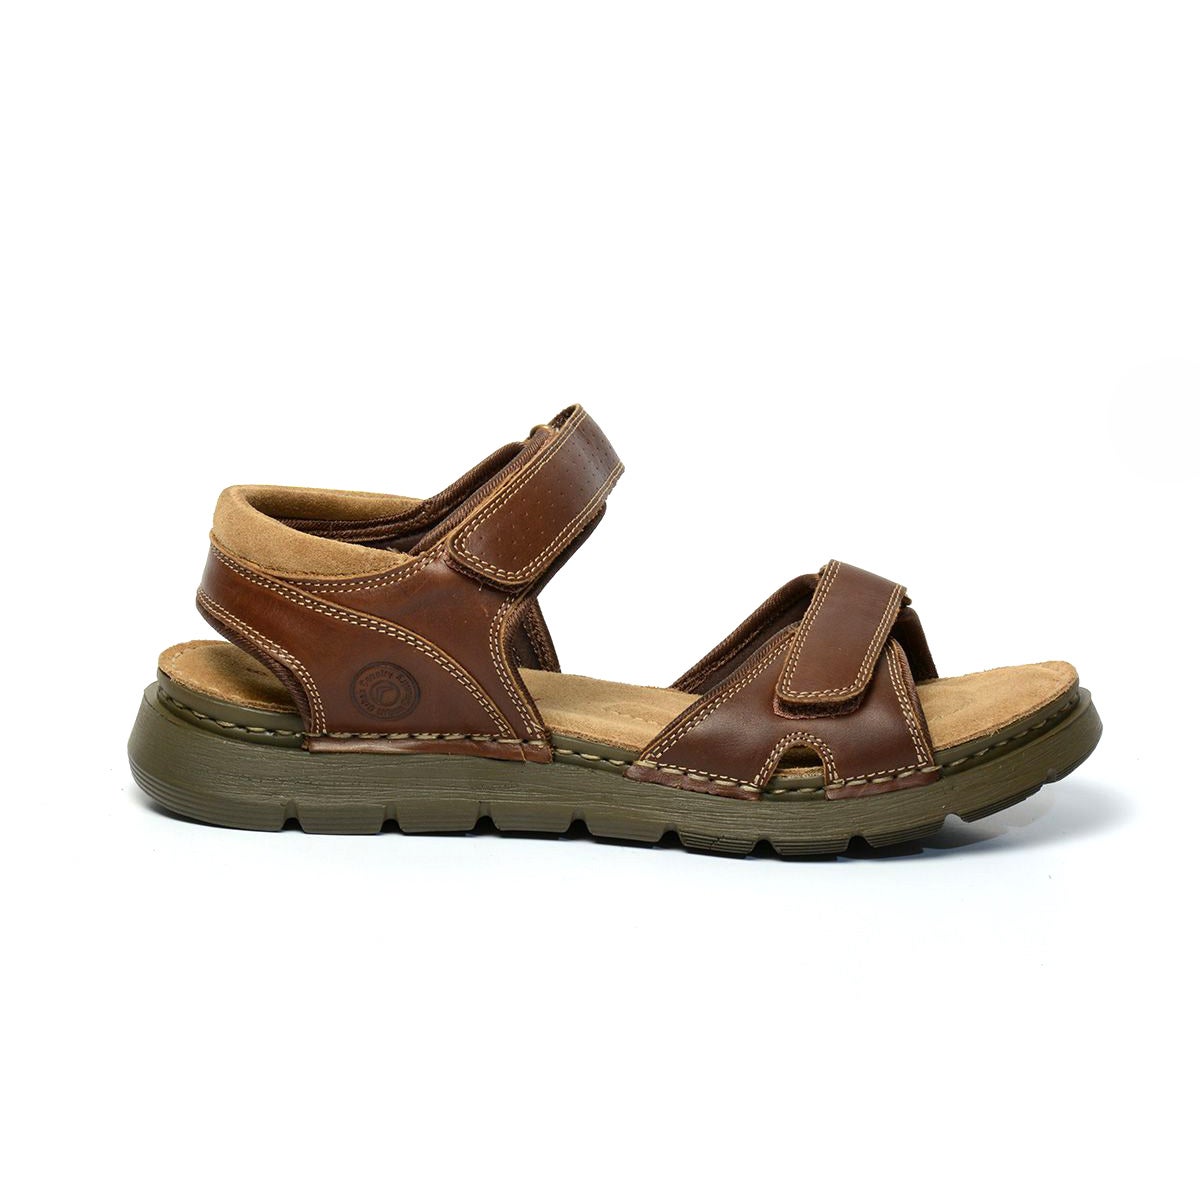 NWOT By Far Melba Wood Suede Leather Sandal | Leather sandals, Suede leather,  Leather